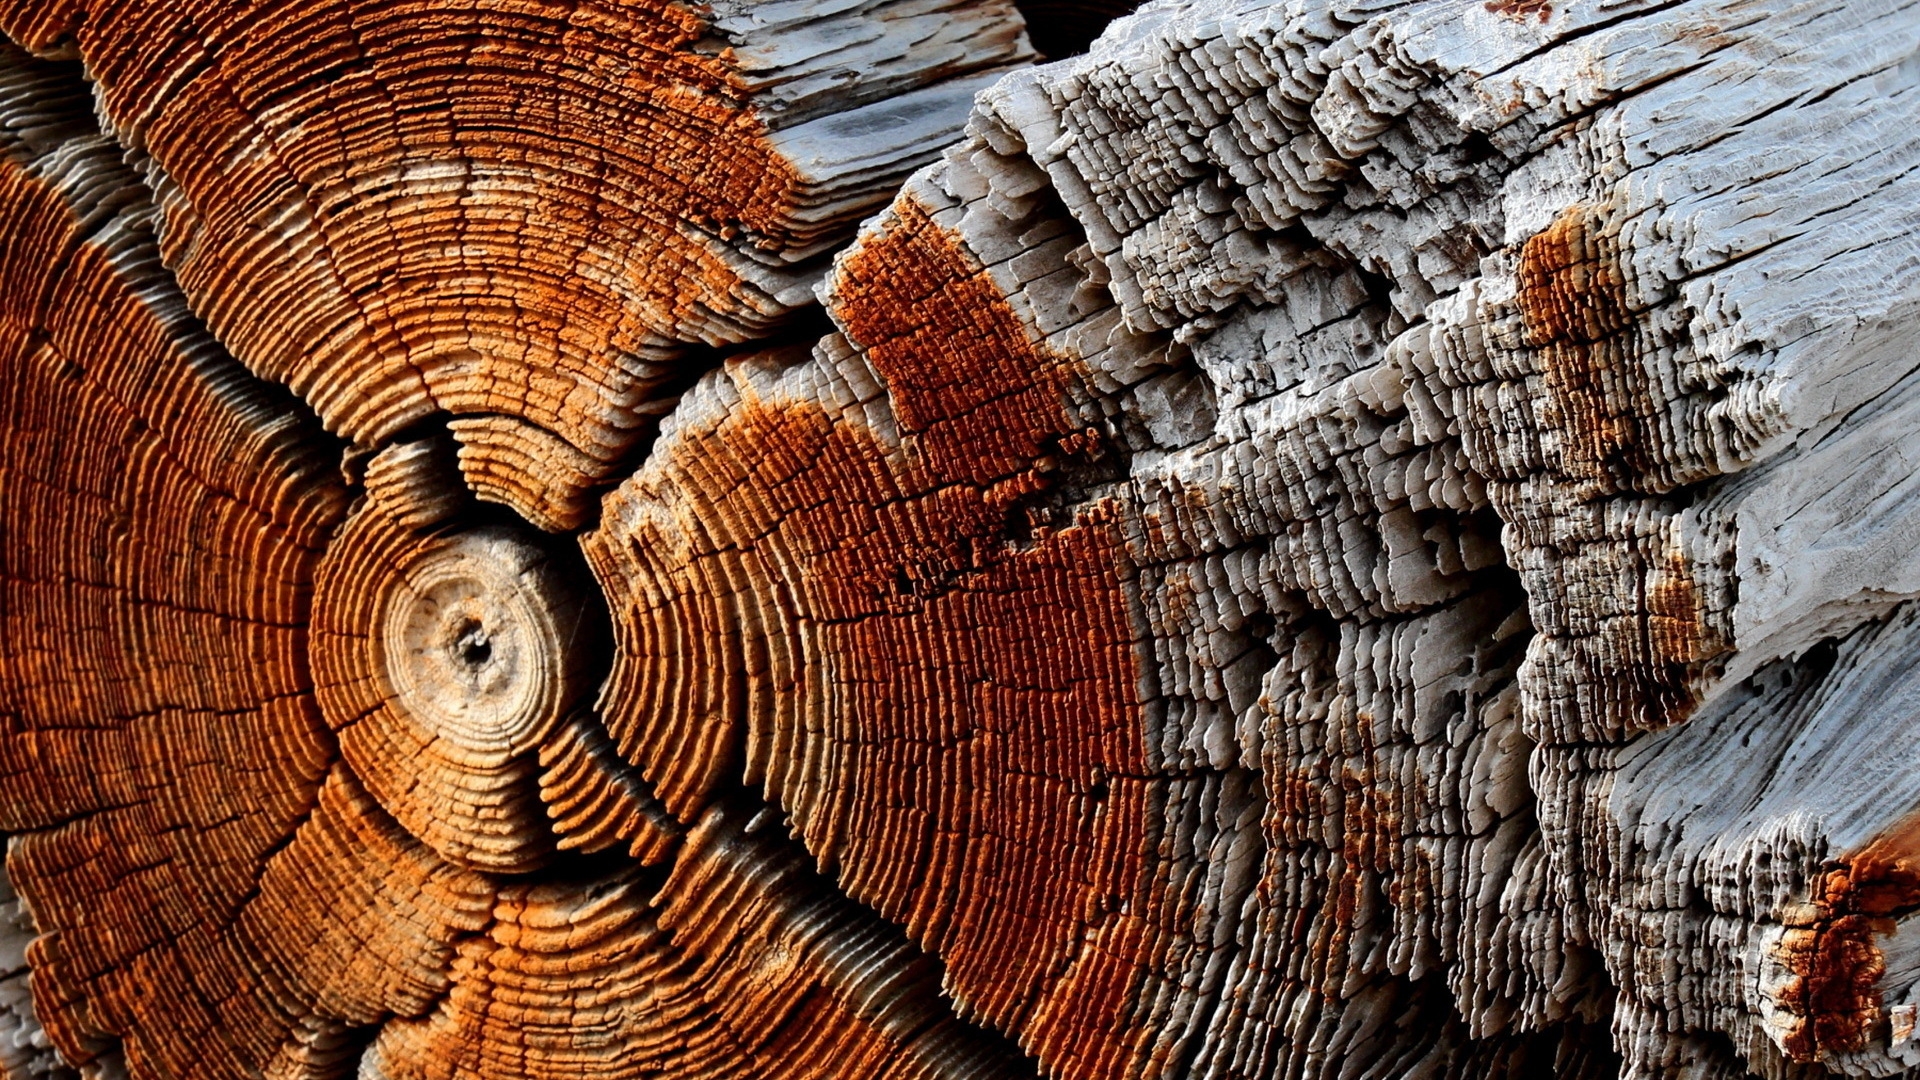 Dry Wood Texture for 1920 x 1080 HDTV 1080p resolution